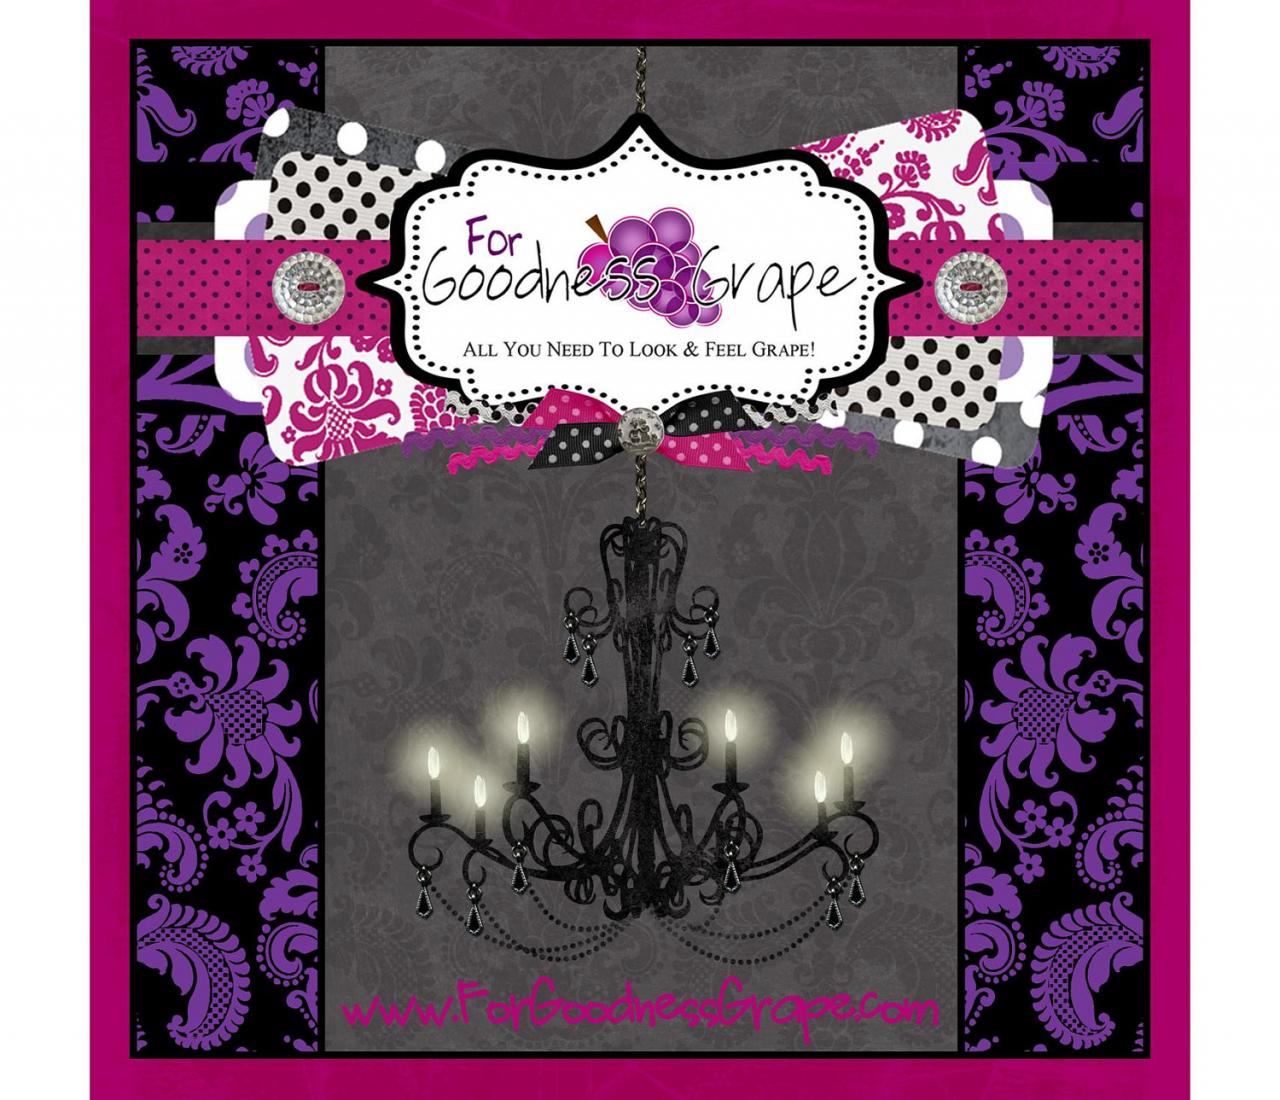 Spend Every Day Of The Week With Forgoodnessgrape - Lip Candy Collection - Your Choice - Handmade And All Natural